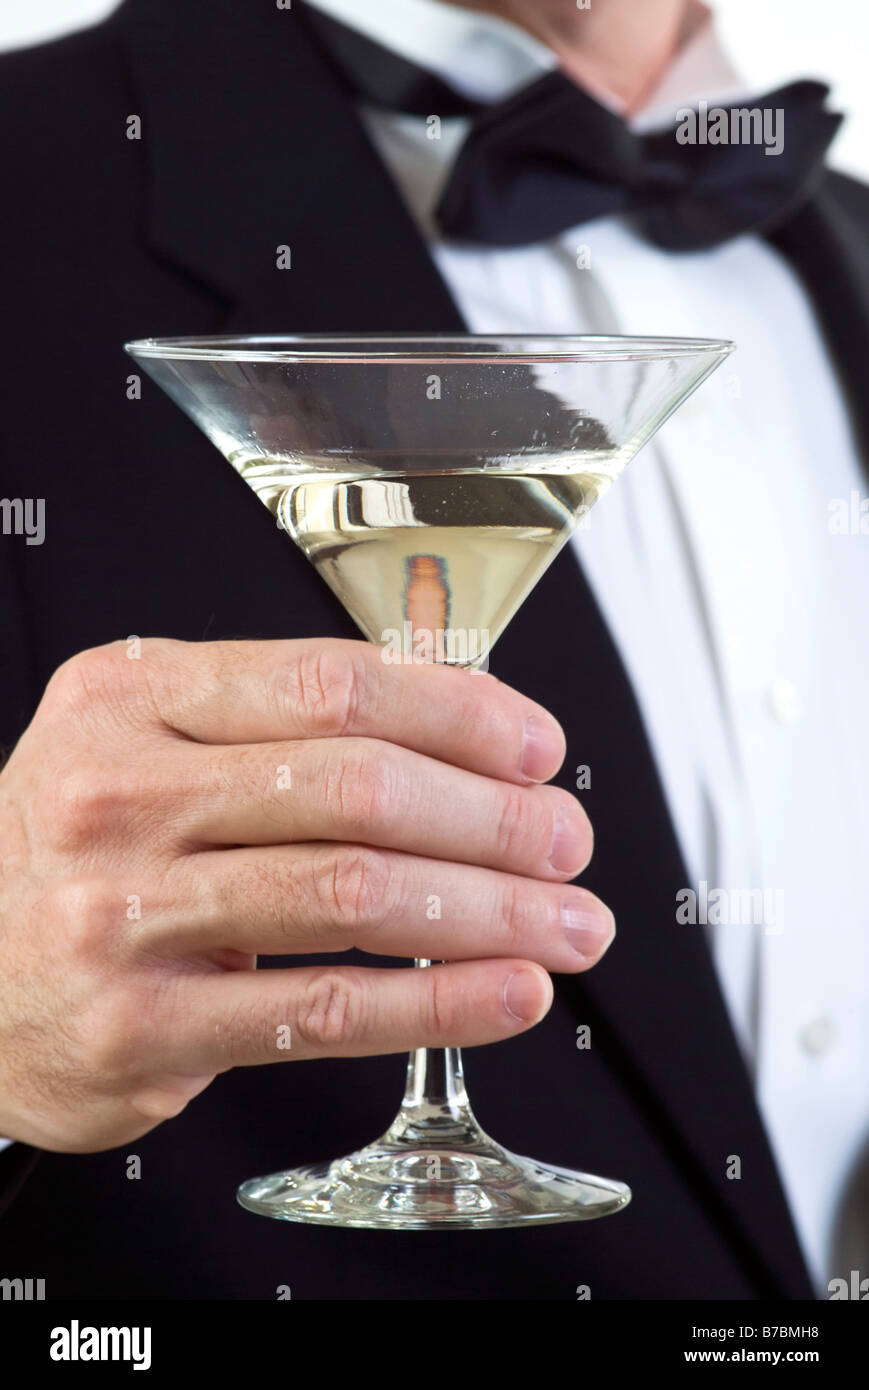 A close up of a man s hand who is dressed in formal attire and holding a  martini glass Stock Photo - Alamy